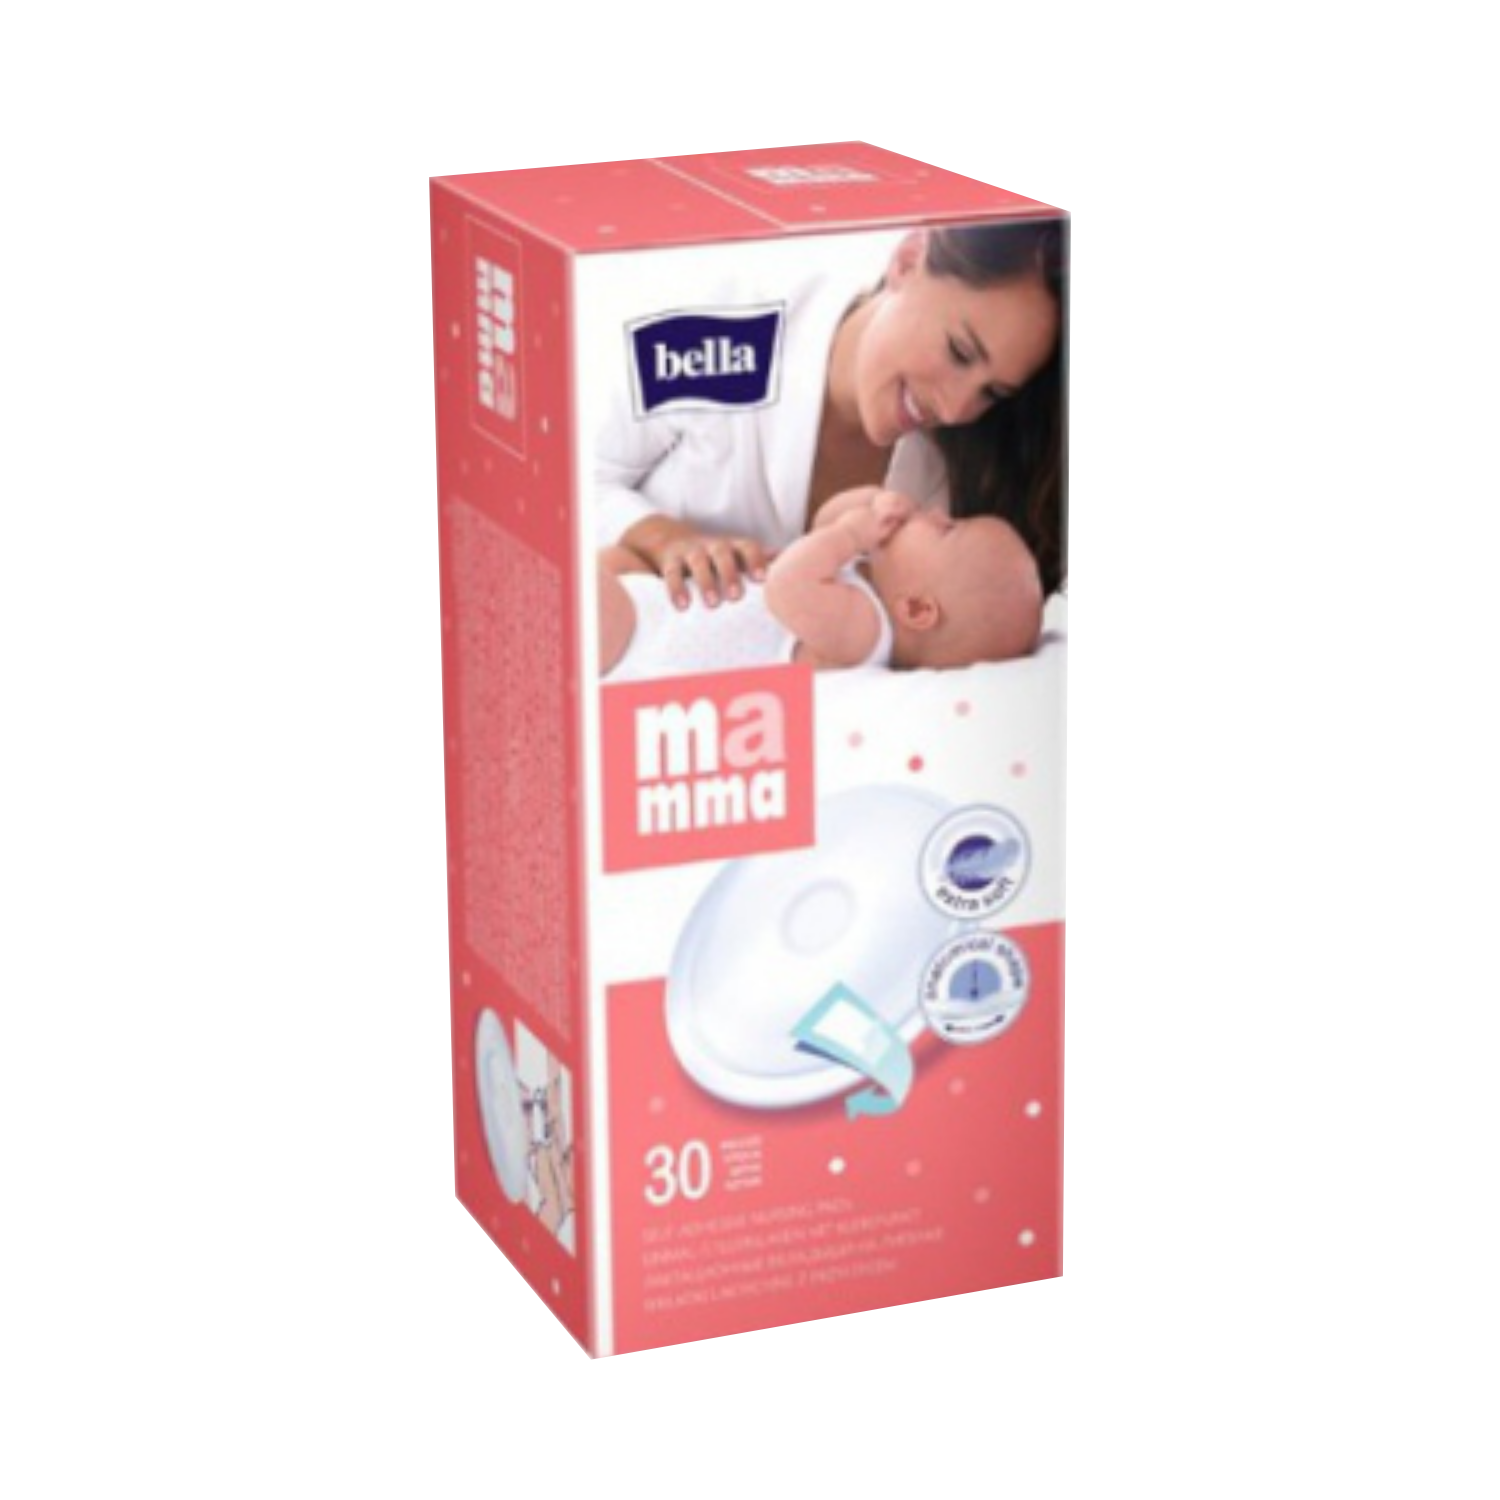 Bella MAMMA lactation pads with Velcro, 30 pcs. in cart.